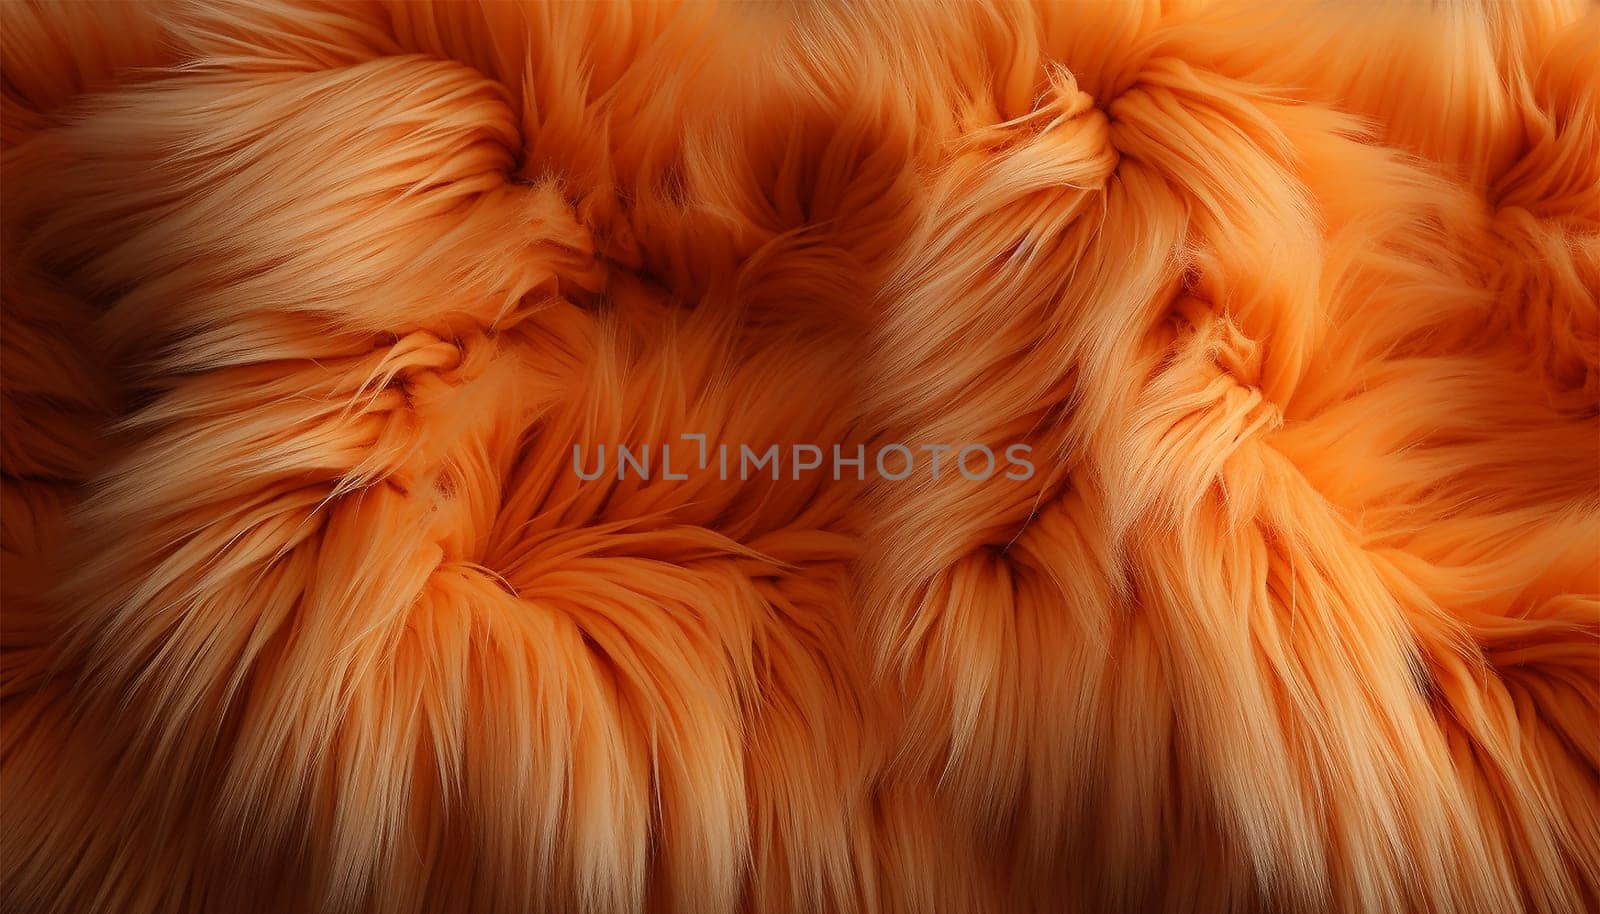 Orange fur background texture Abstract. Bright pastel ginger colored. Textures red fox fur. Red fox shaggy fur texture cloth abstract, furry rusty texture plain surface, rough pelt background in horizontal orientation, nobody. Colorful